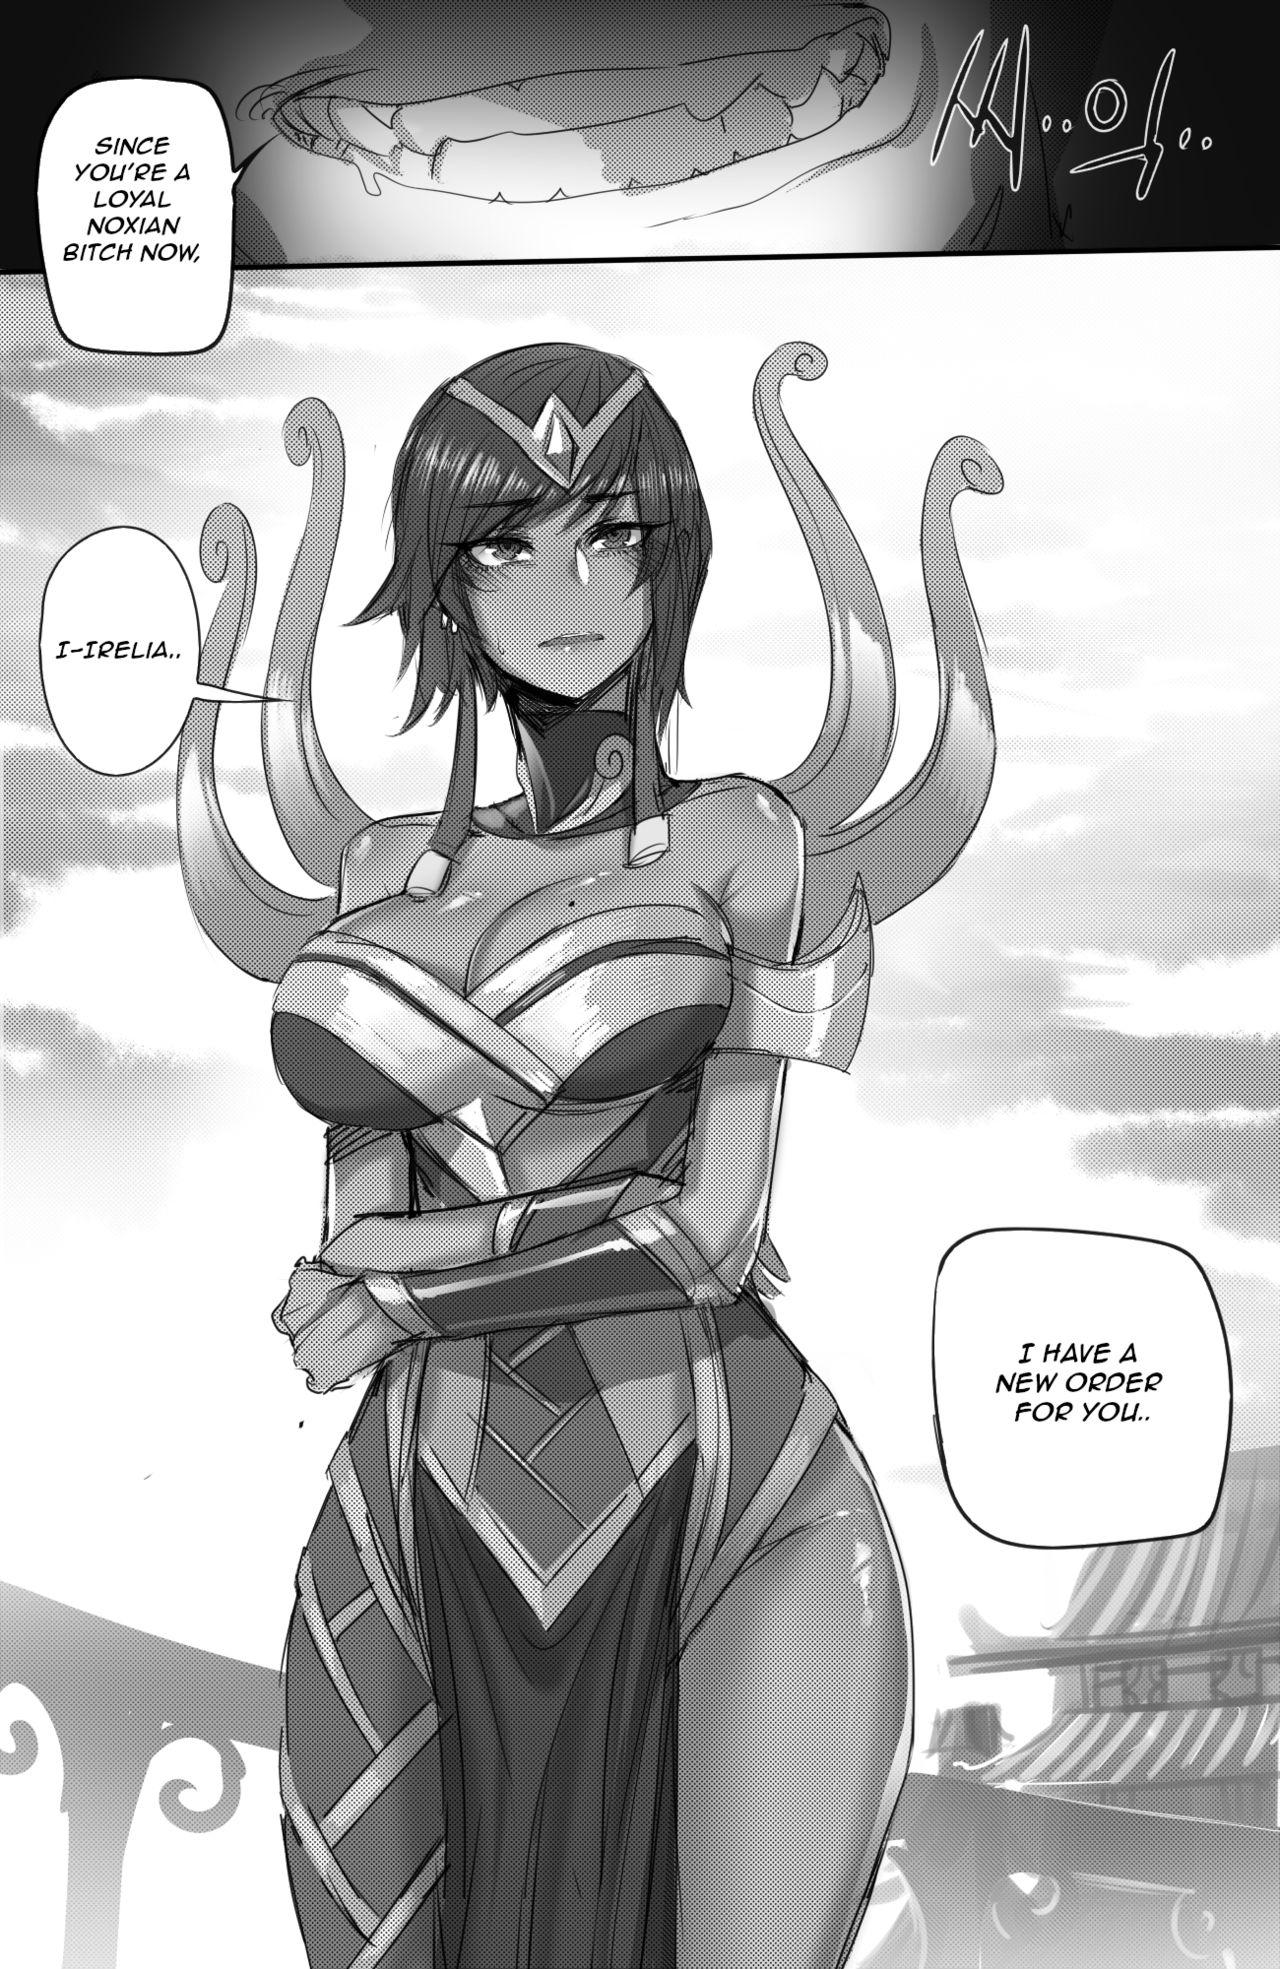 Public Sex The Fall of Irelia 2 - League of legends Gay Uncut - Page 24